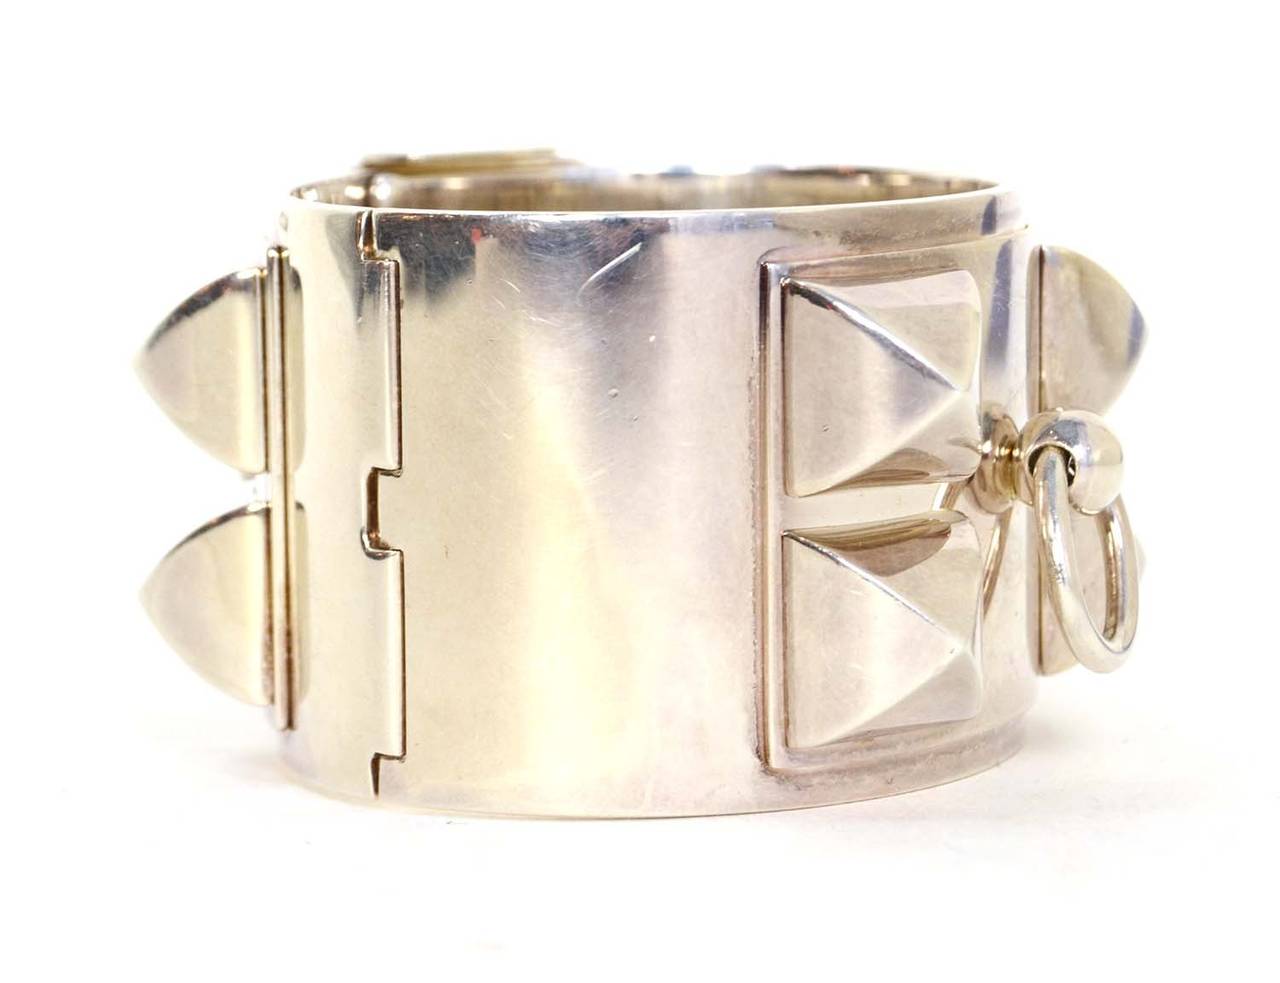 Hermes Sterling Silver Collier De Chien CDC Cuff Bracelet
Features iconic CDC pyramid studs and door knocker accent
Made in: Not given
Stamp: Ag925 A*D
Closure: Hinge opening with hook lever closure
Color: Silver
Materials: Sterling